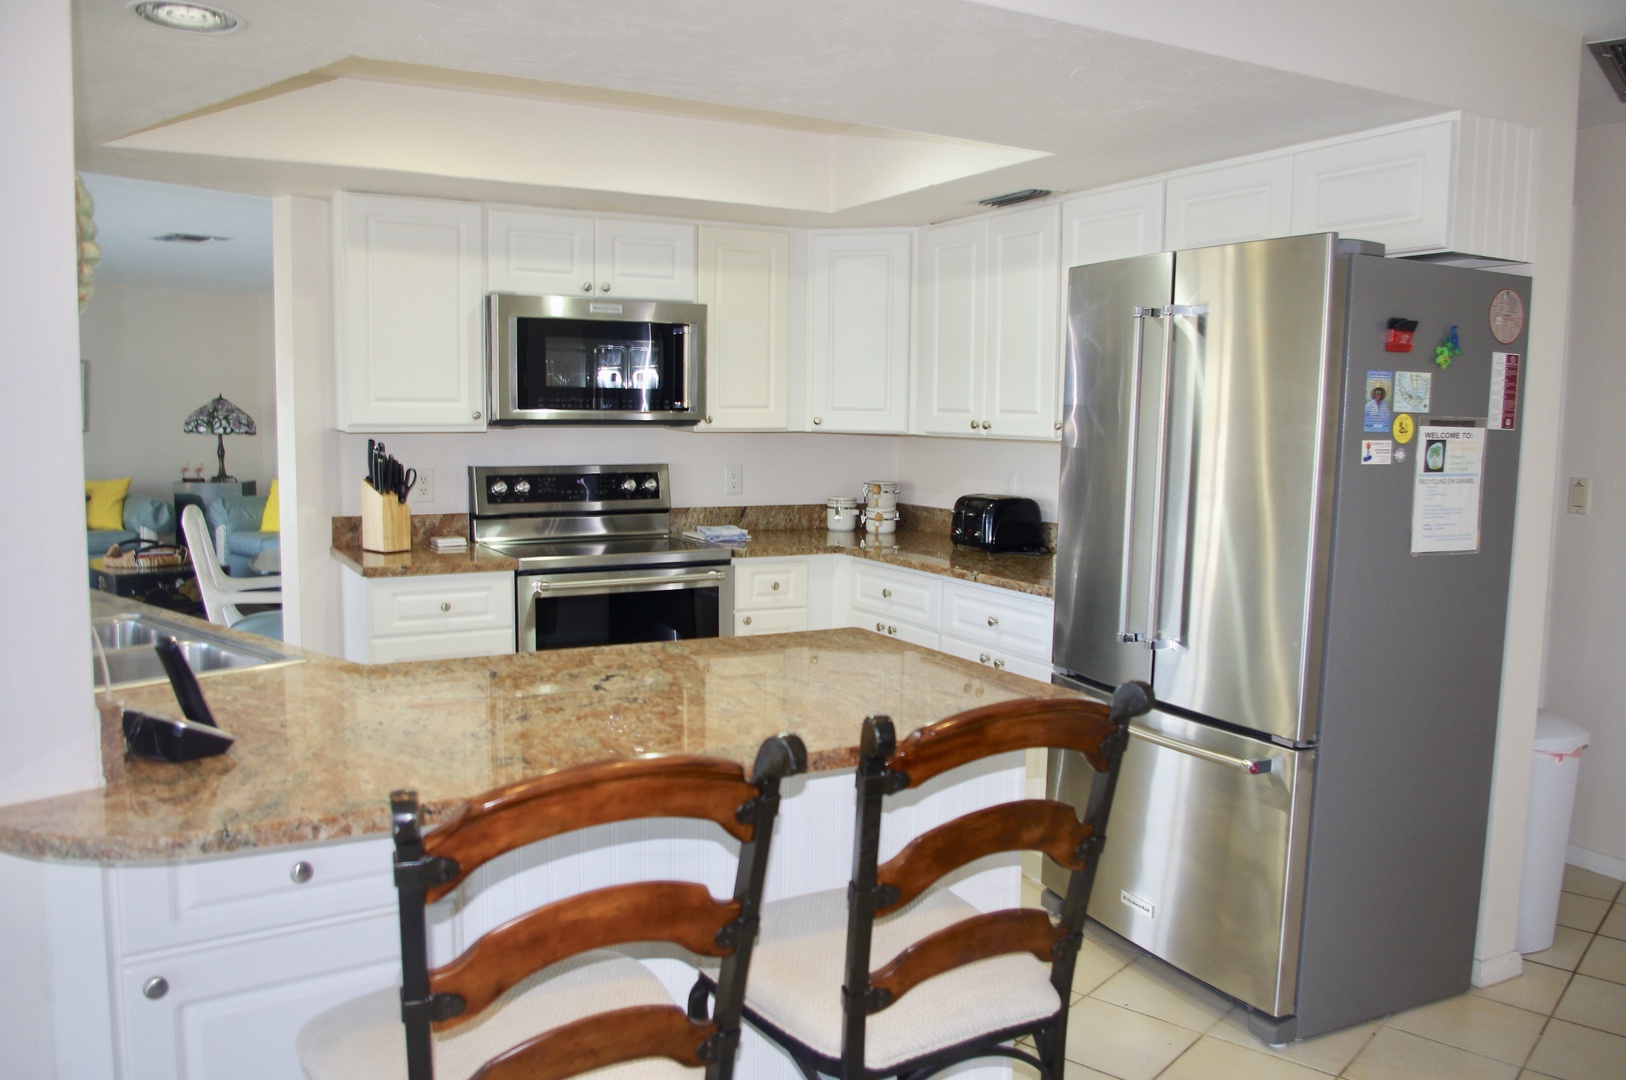 The kitchen features Kitchen-Aid appliances, pool and water view.